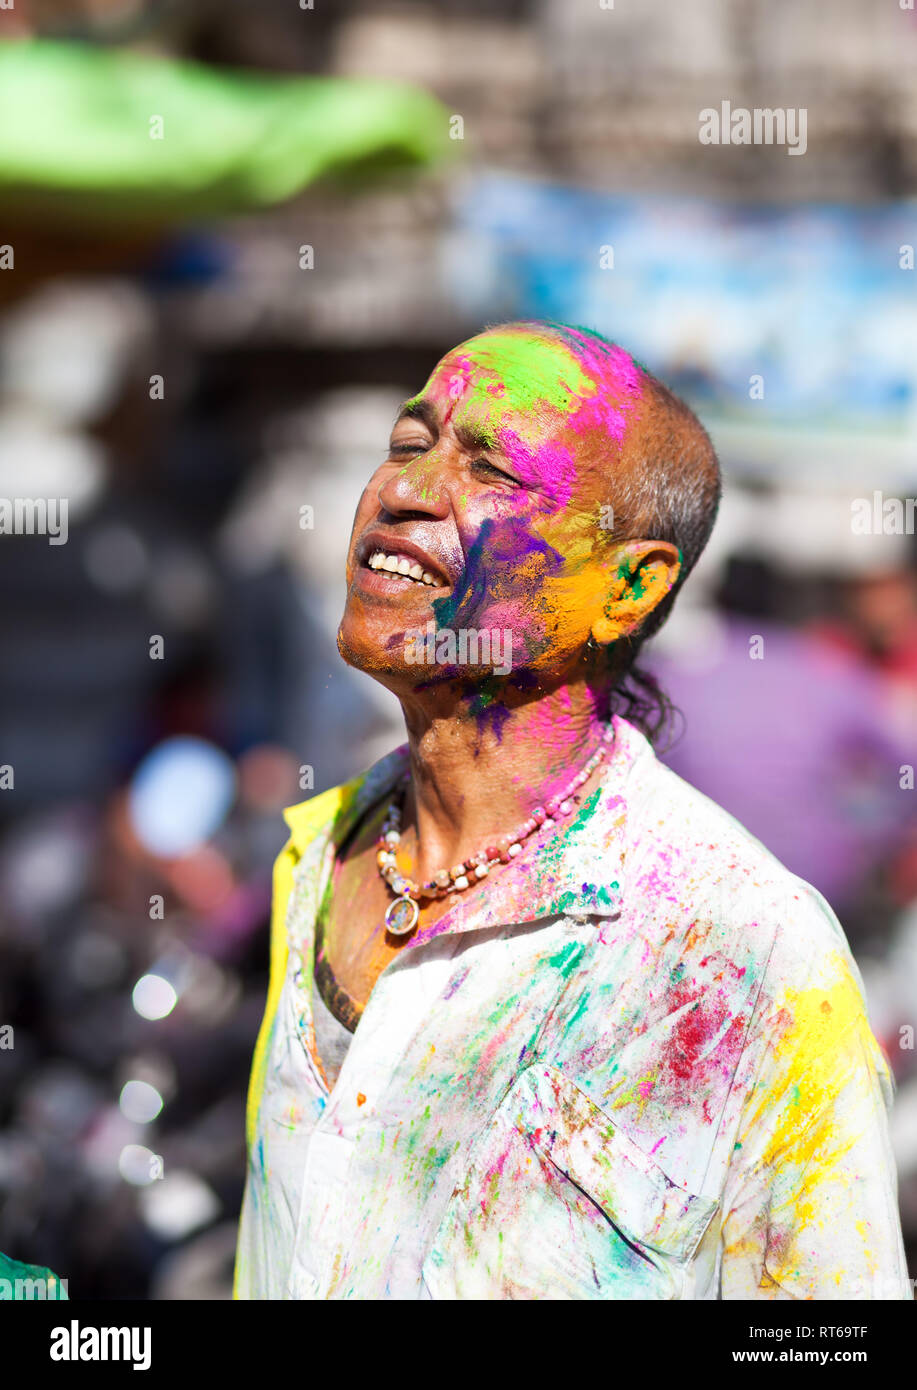 Udaipur, India - March 6, 2015: Portrait of Indian man with painted face celebrating the colorful festival of Holi on the street. Stock Photo